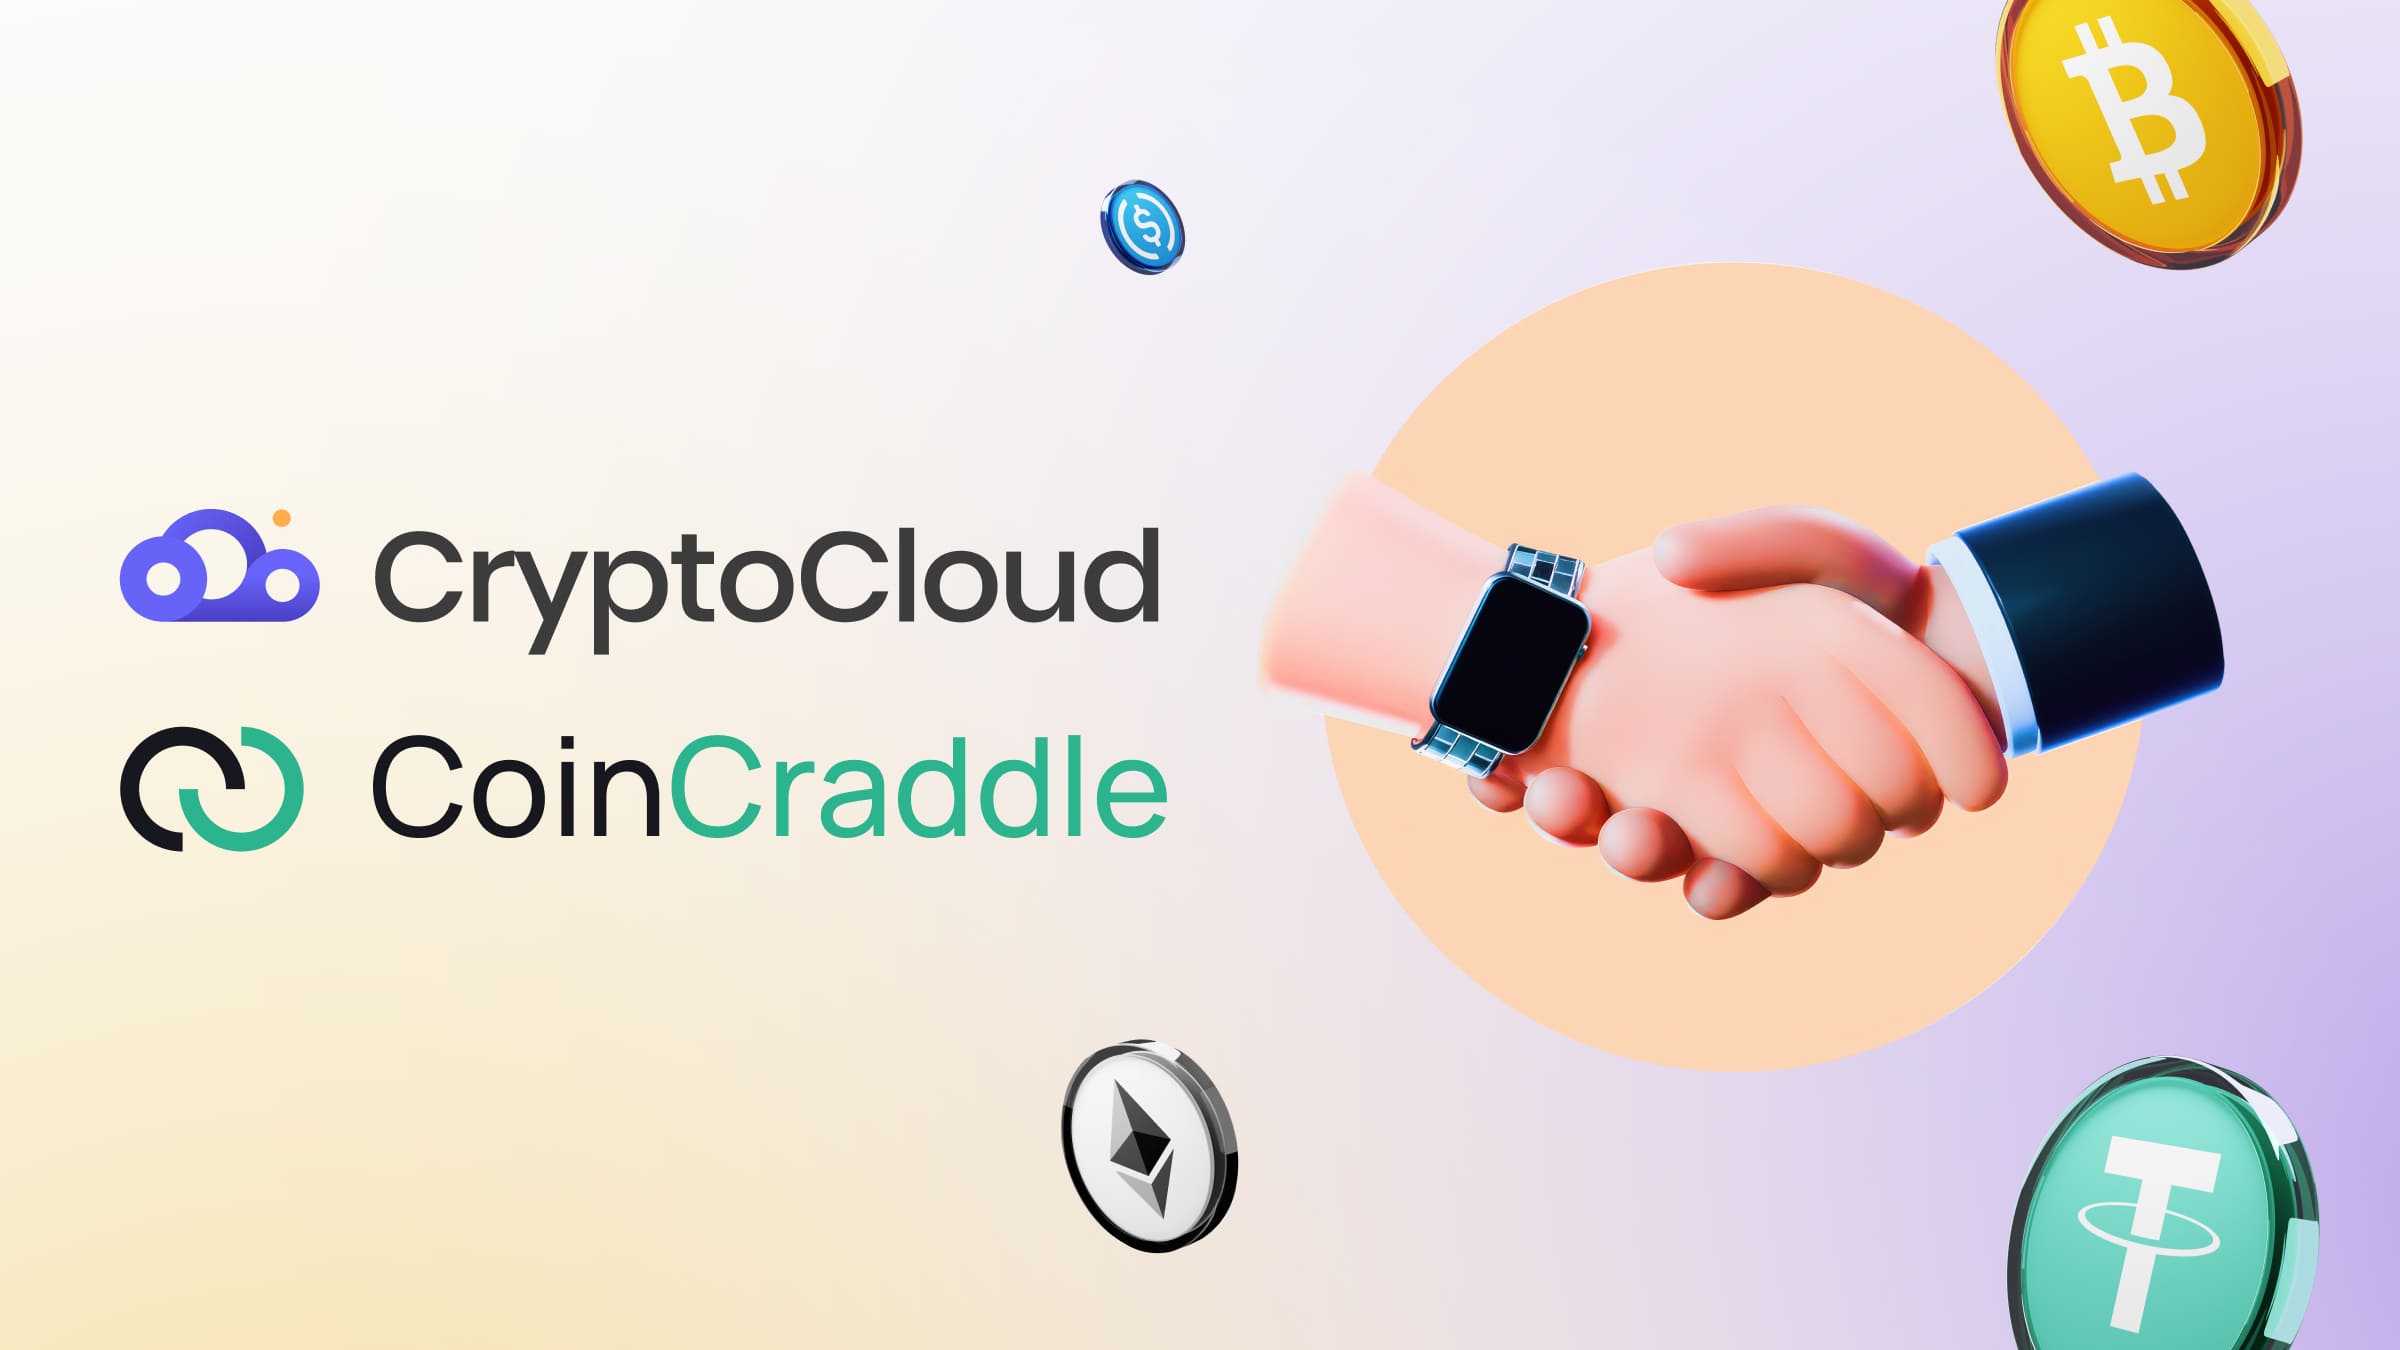 CoinCraddle — new provider for CryptoCloud cryptocurrency exchange.